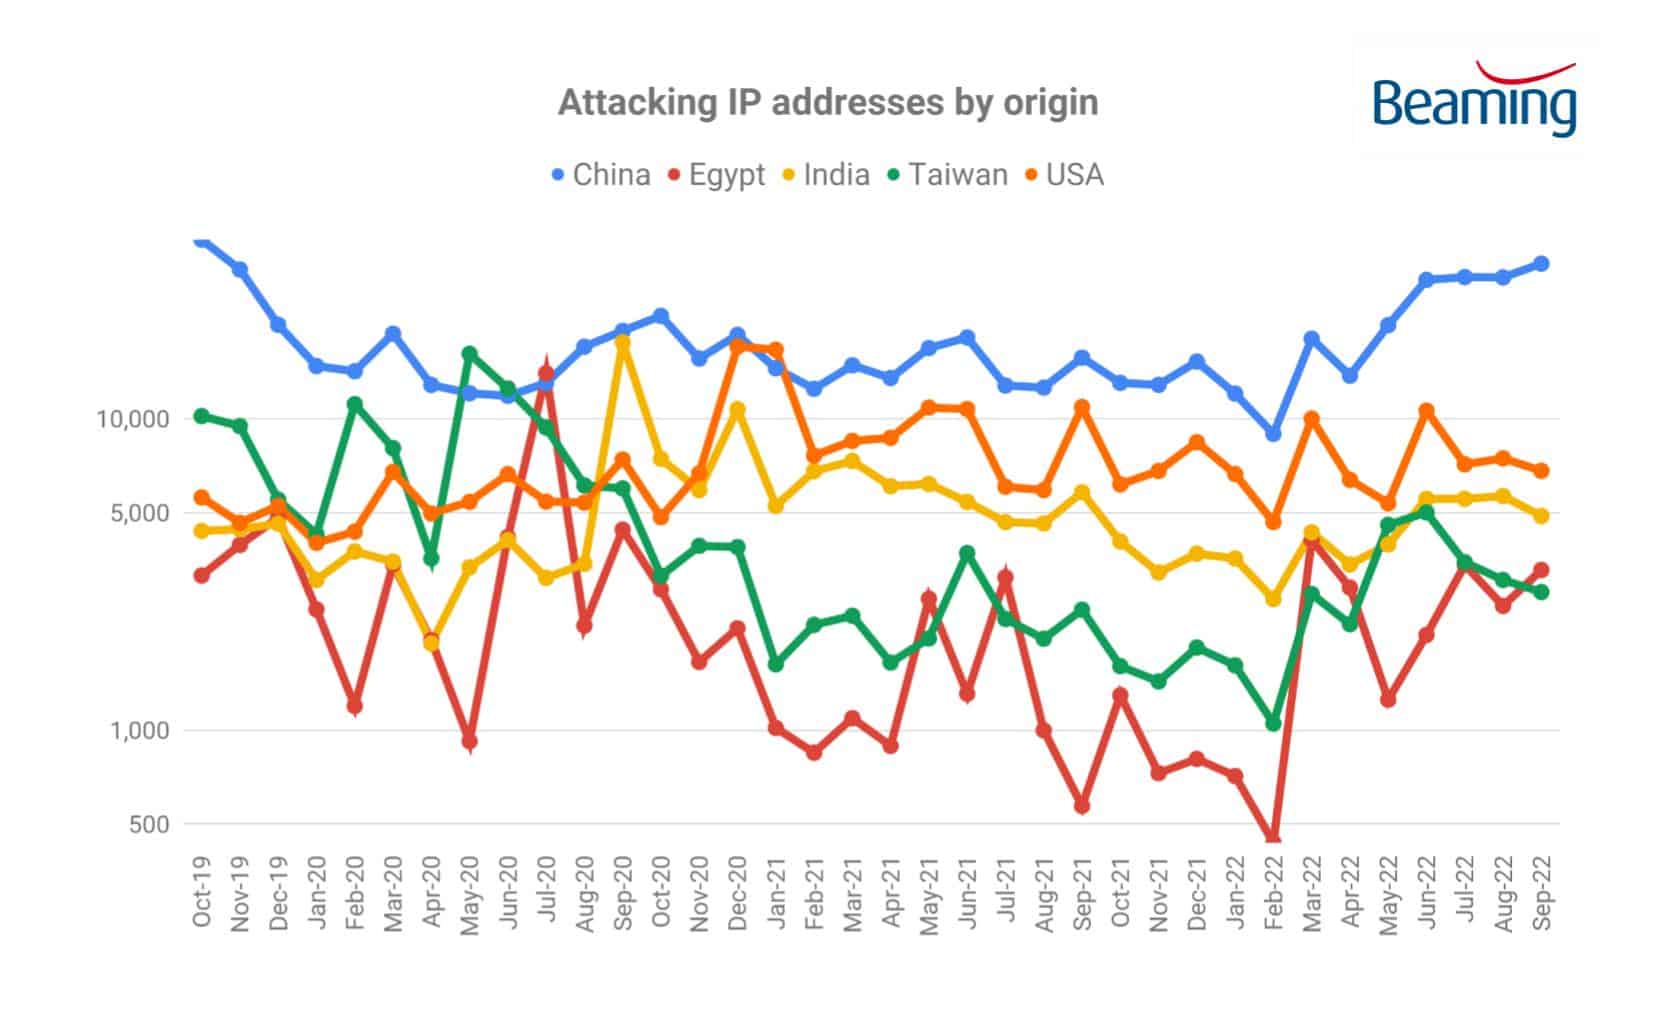 Attacking IP addresses by origin Oct19 - Sep22